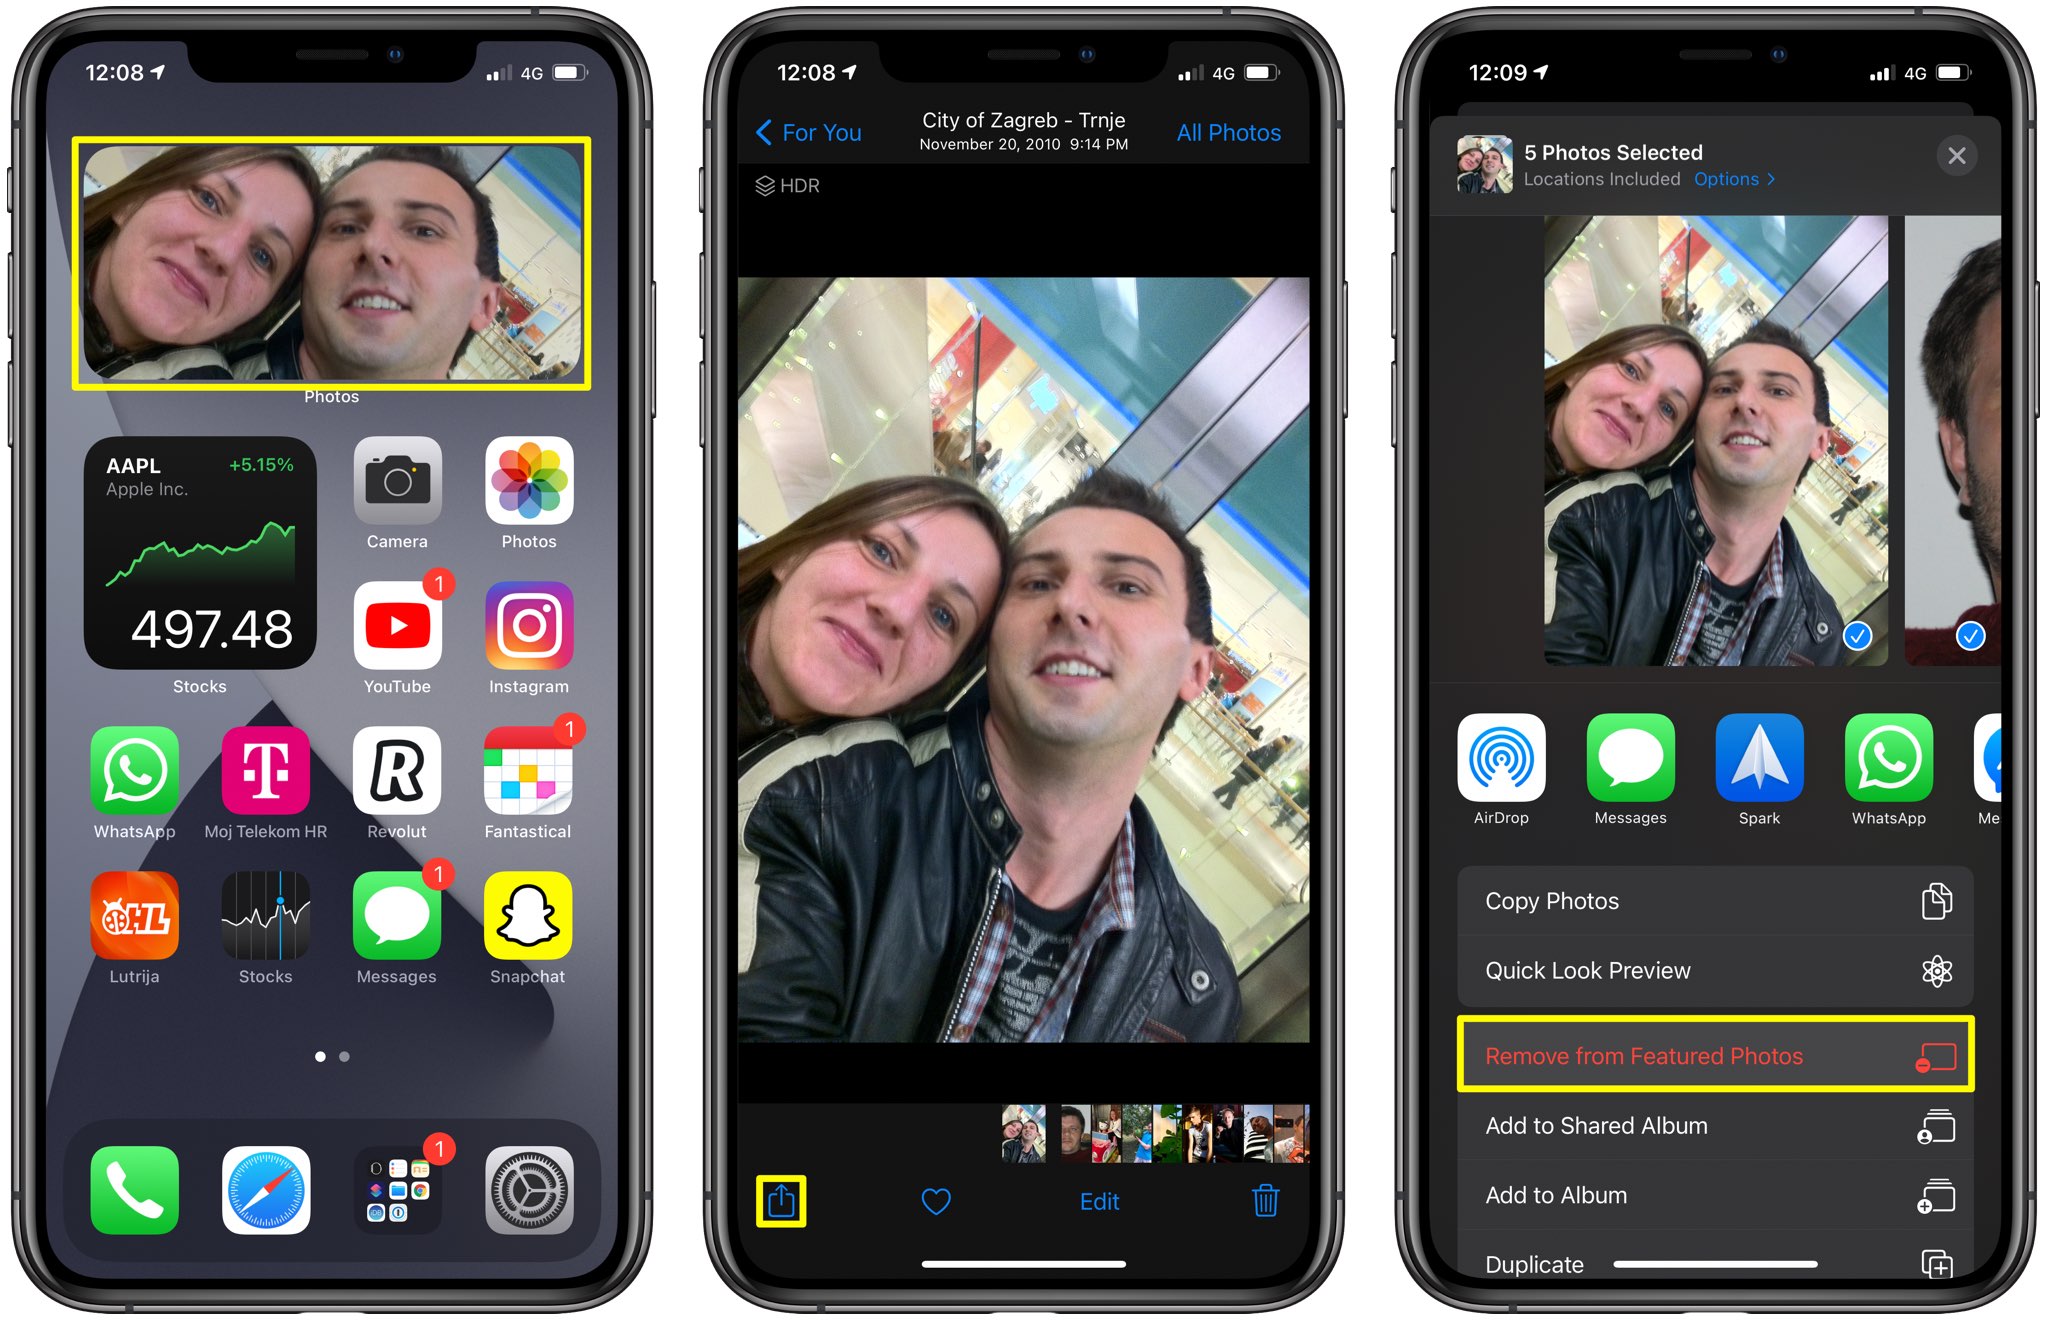 How to remove a featured image in the Photos widget on iPhone